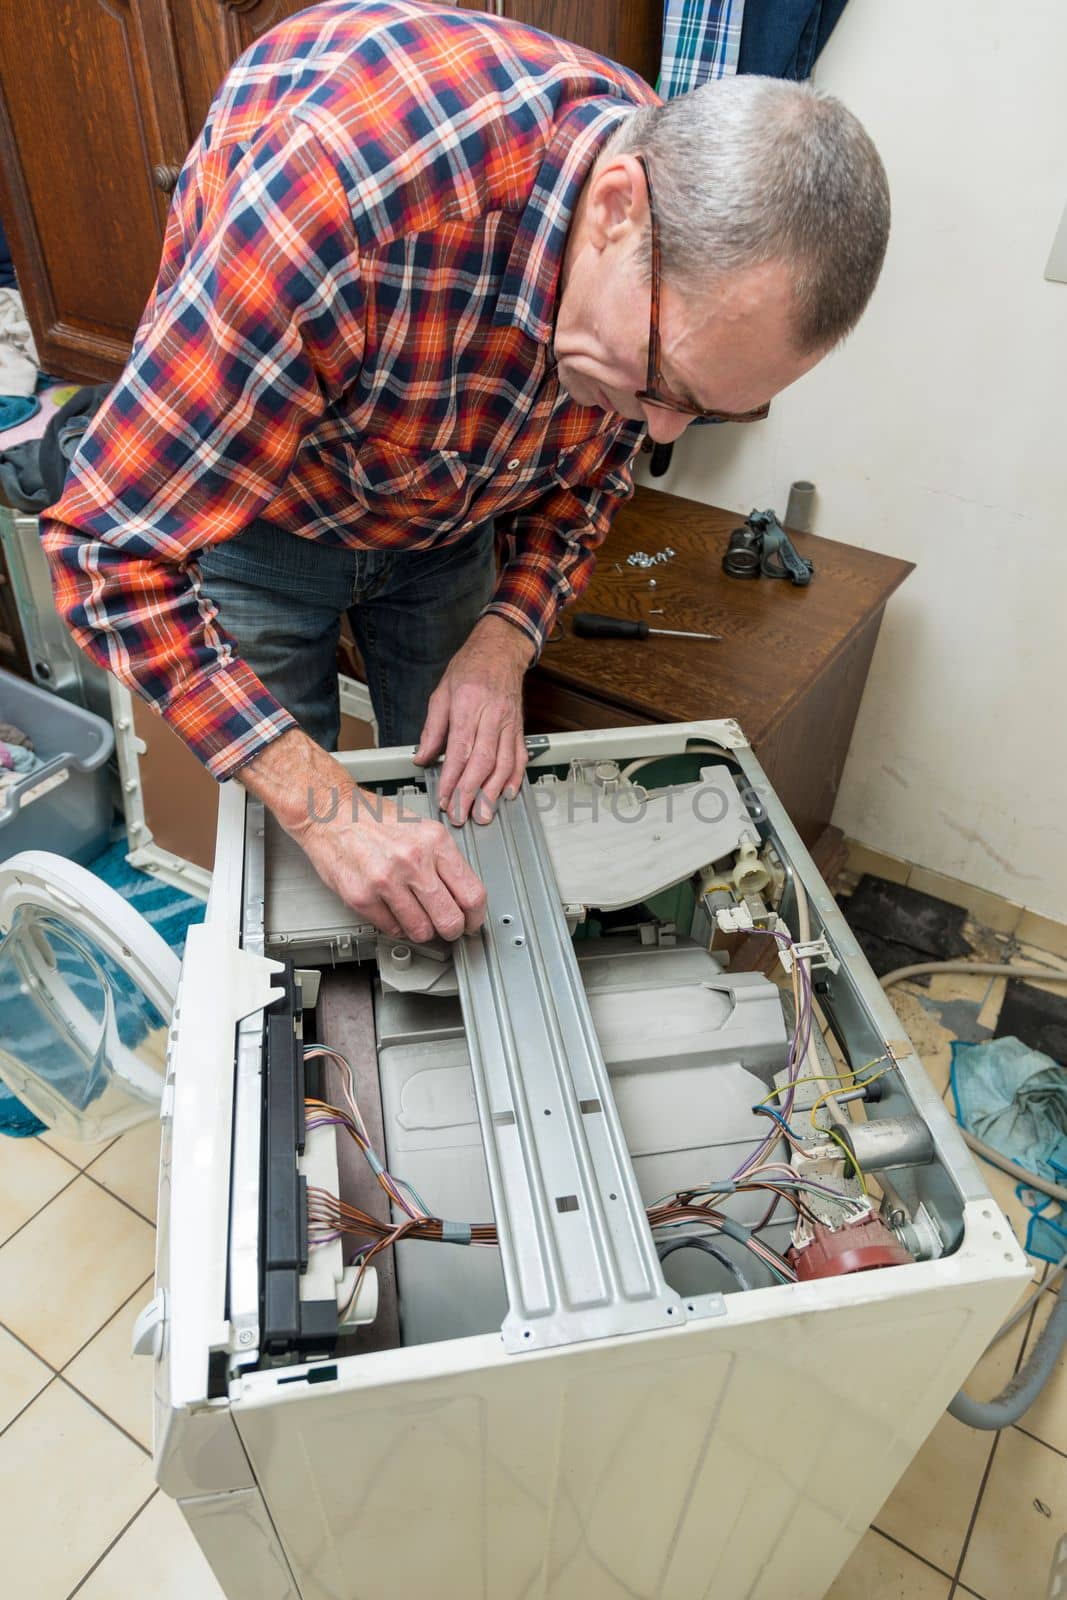 Middle aged man repairing broken washing machine with tools, household chores. High quality photo